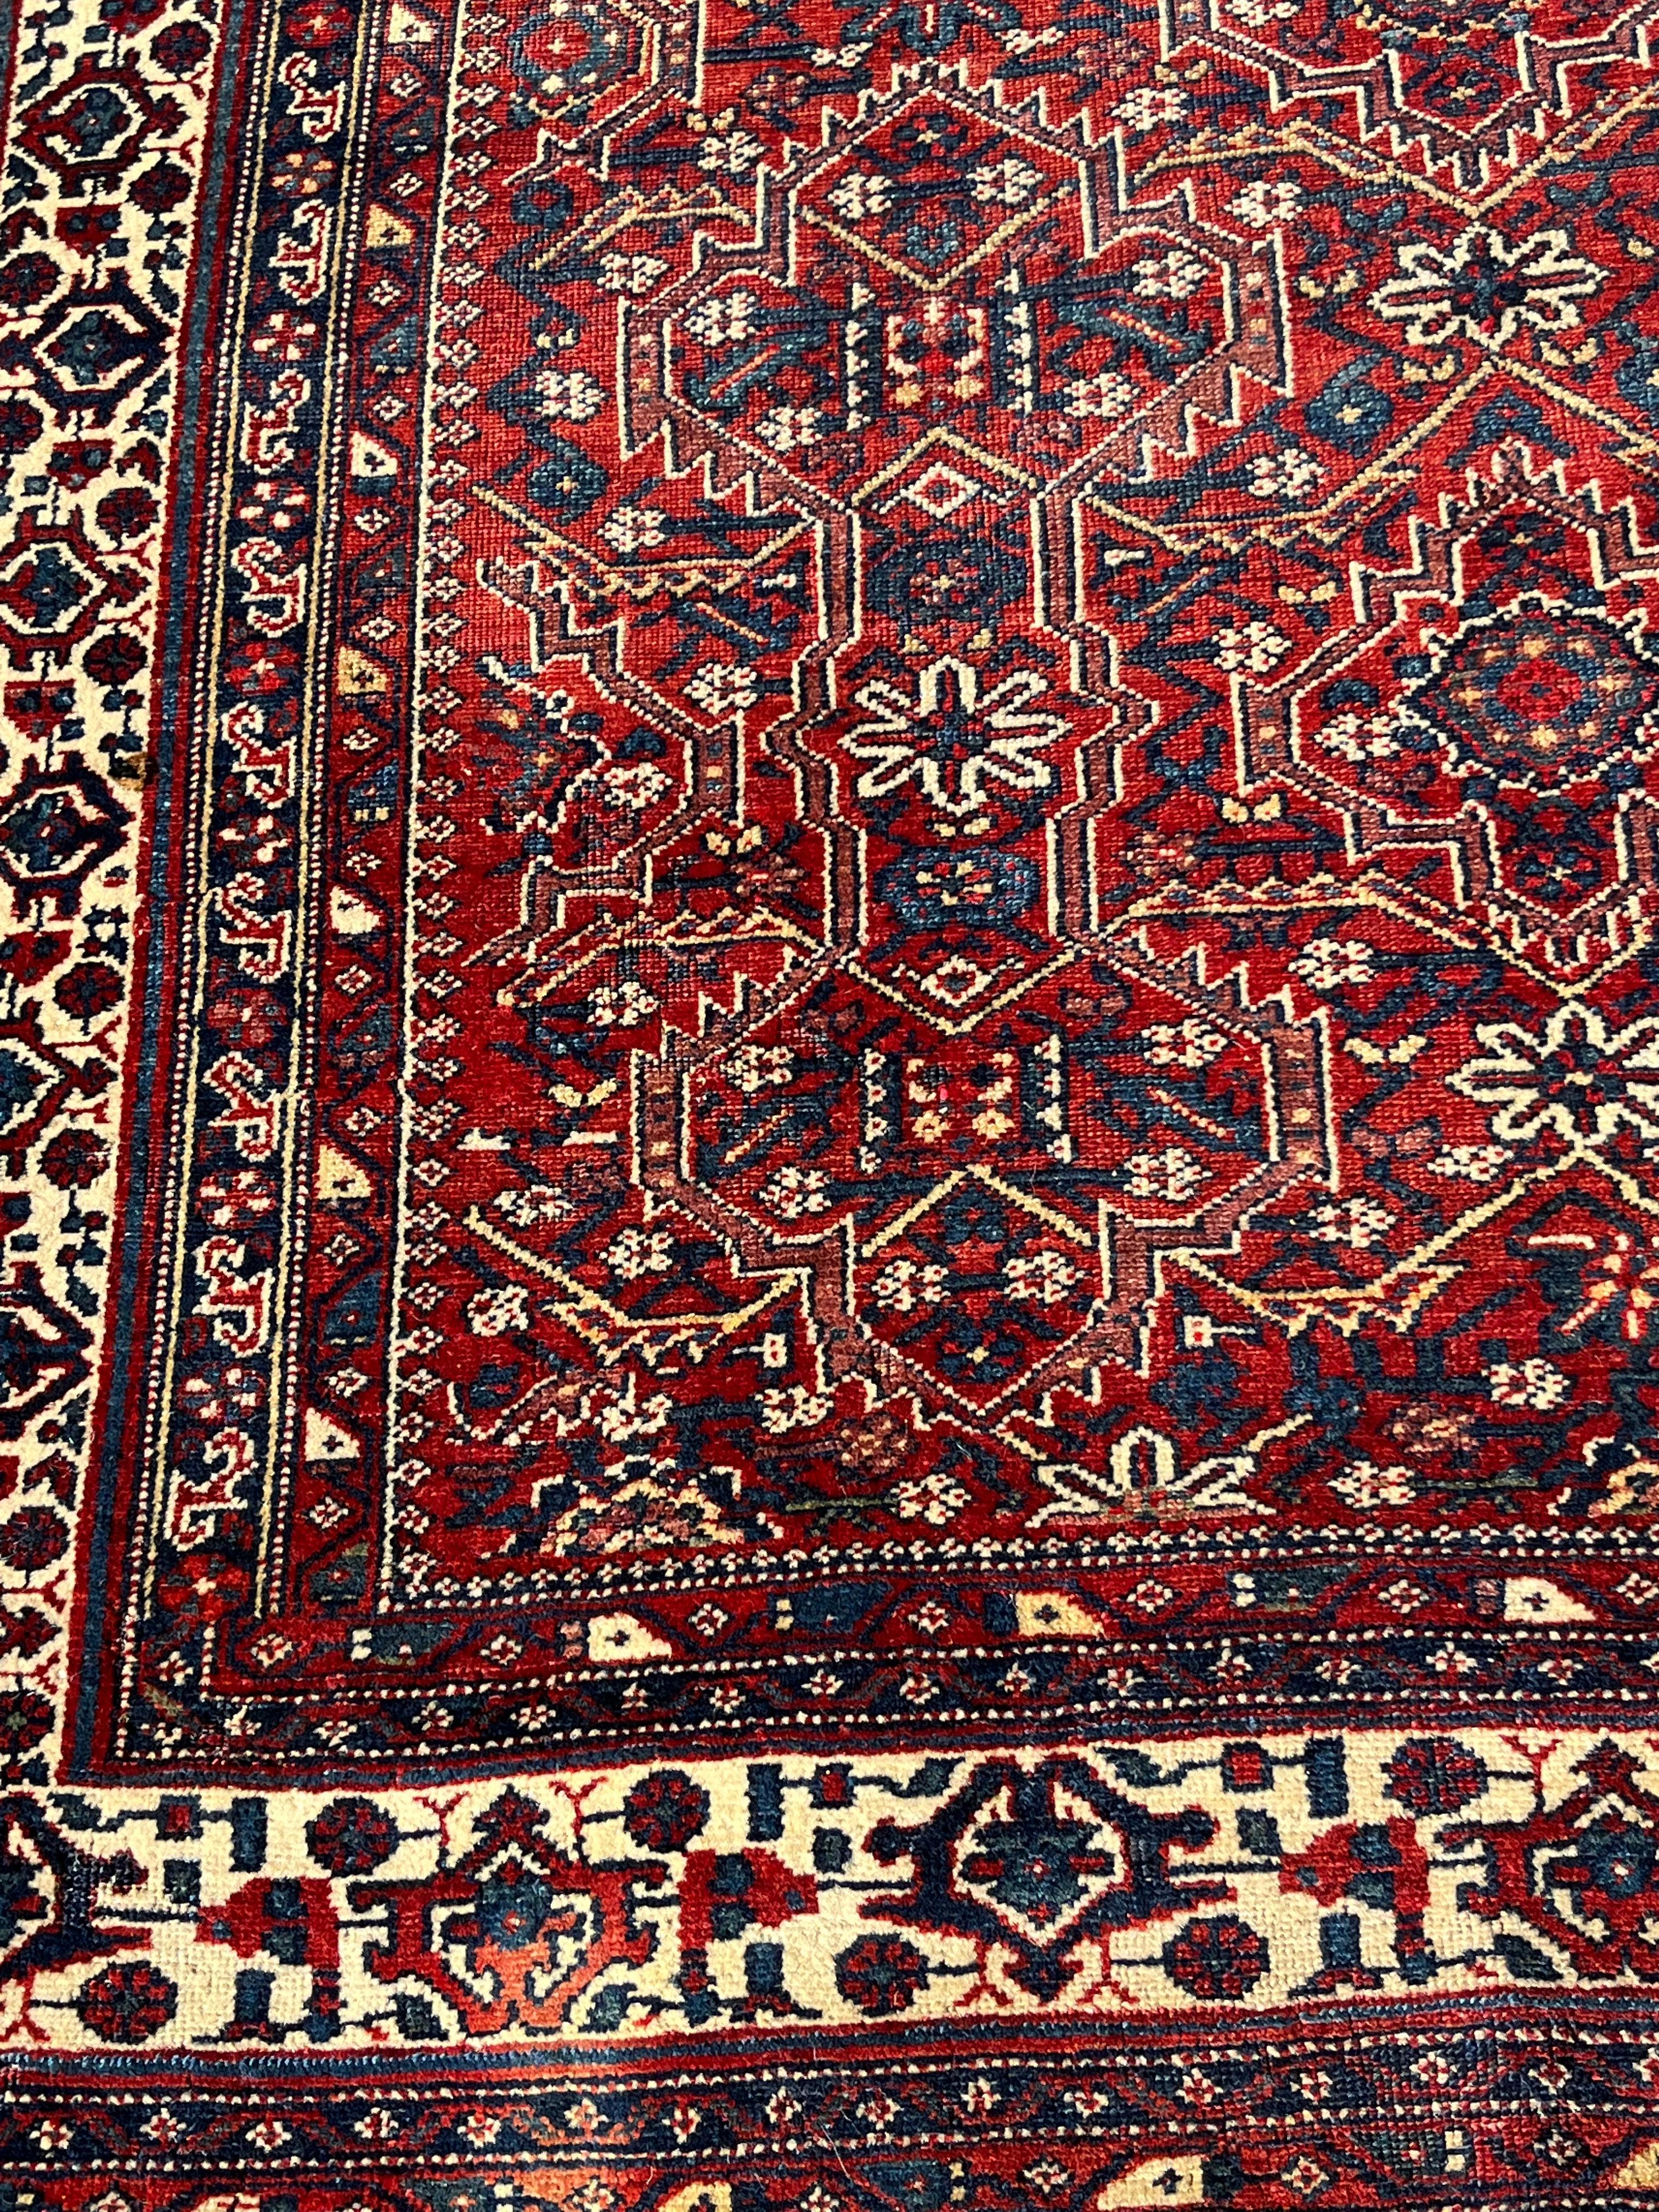 Nice thin piled, tightly woven Oriental rug with even wear. Overall pattern on a rust colored field. Great squarish size. Minor end loss with ends professionally secured. Measures: 5''1